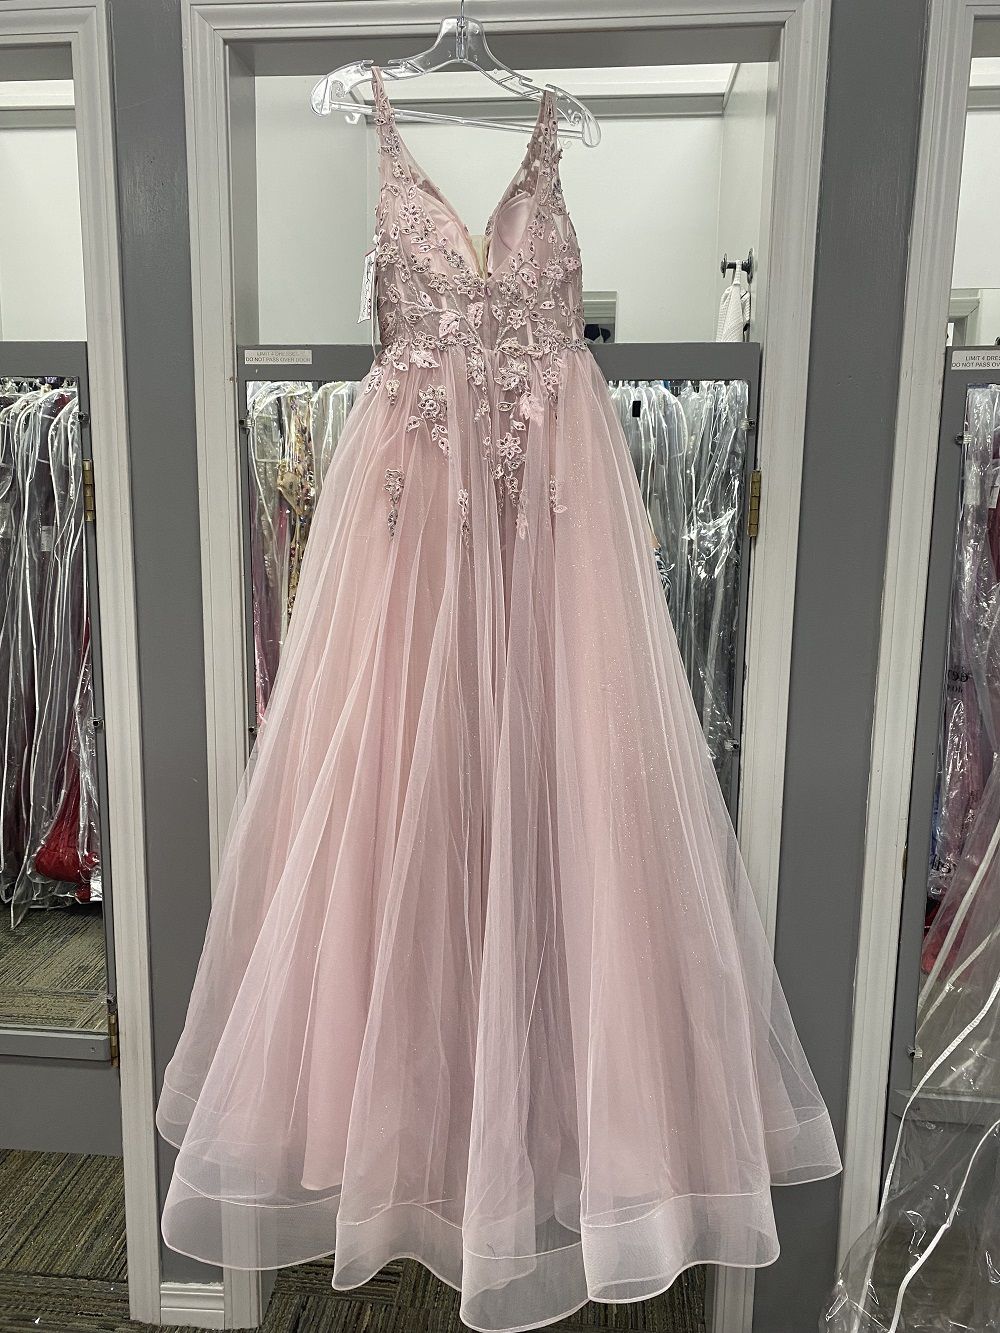 Style 20332 Blush Prom Size 4 Prom Lace Light Pink Ball Gown on Queenly